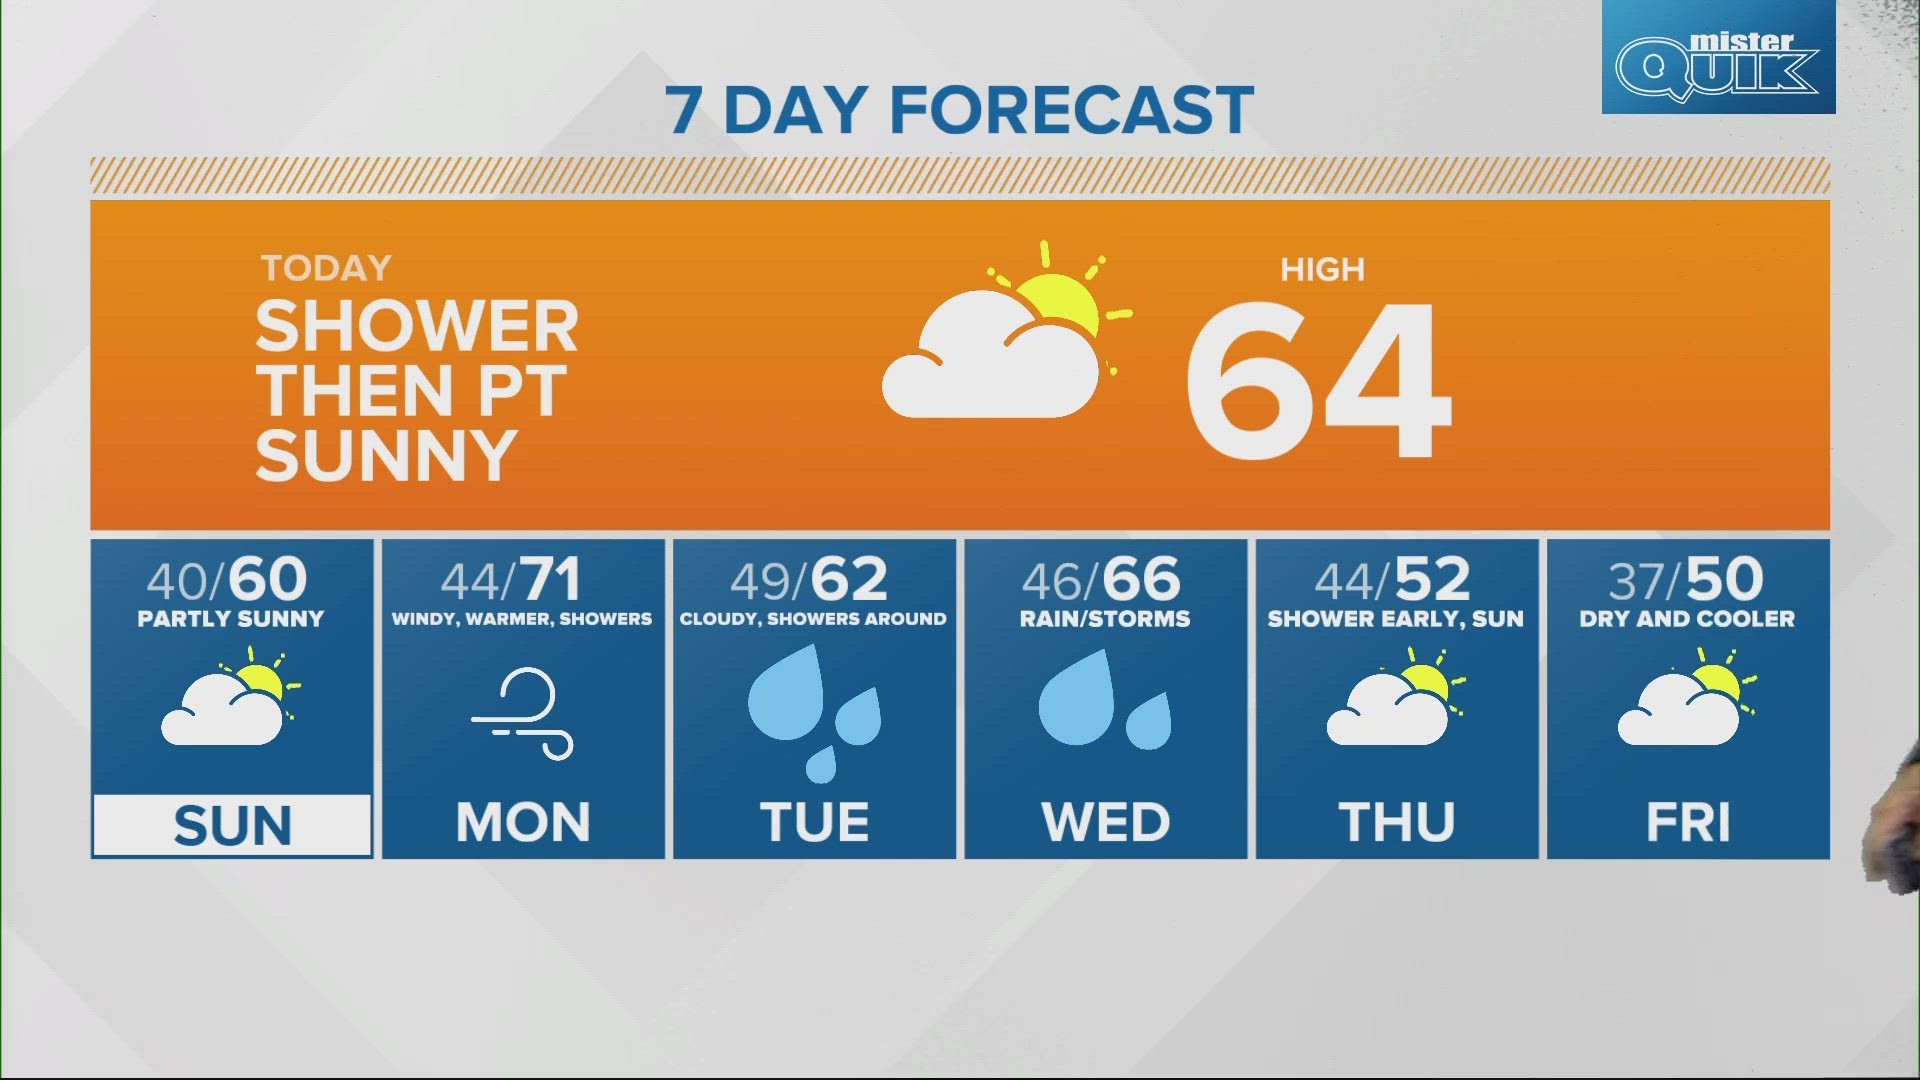 Temperatures rise once again this week and bring back a few chances of showers.